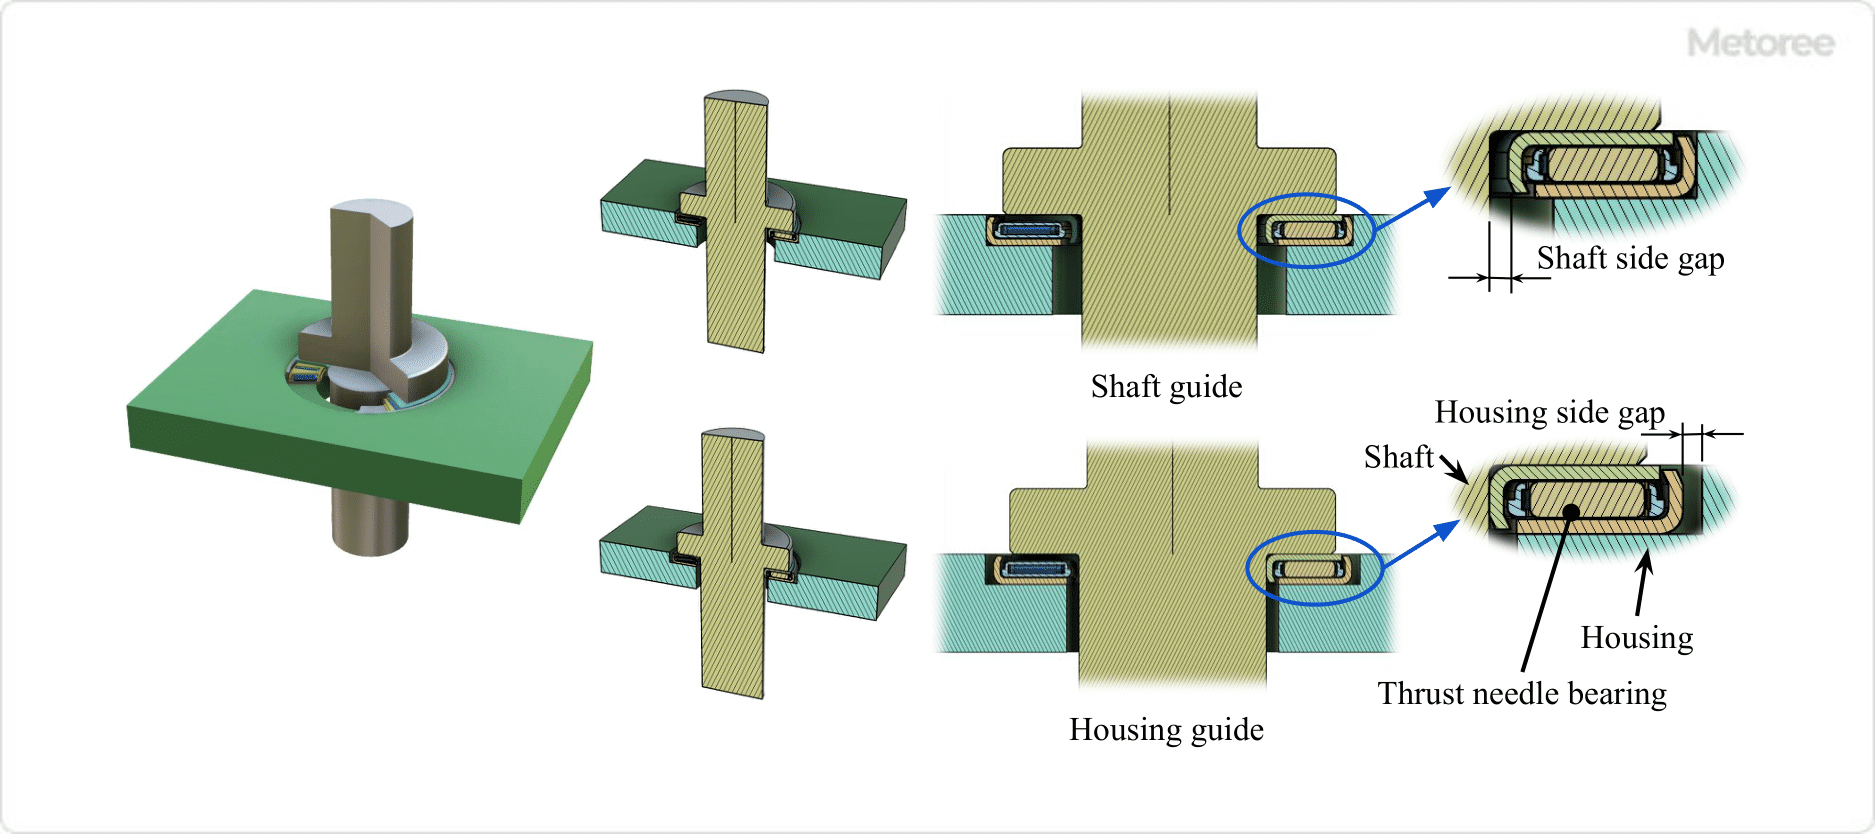 Figure 3. Shaft guide and housing guide